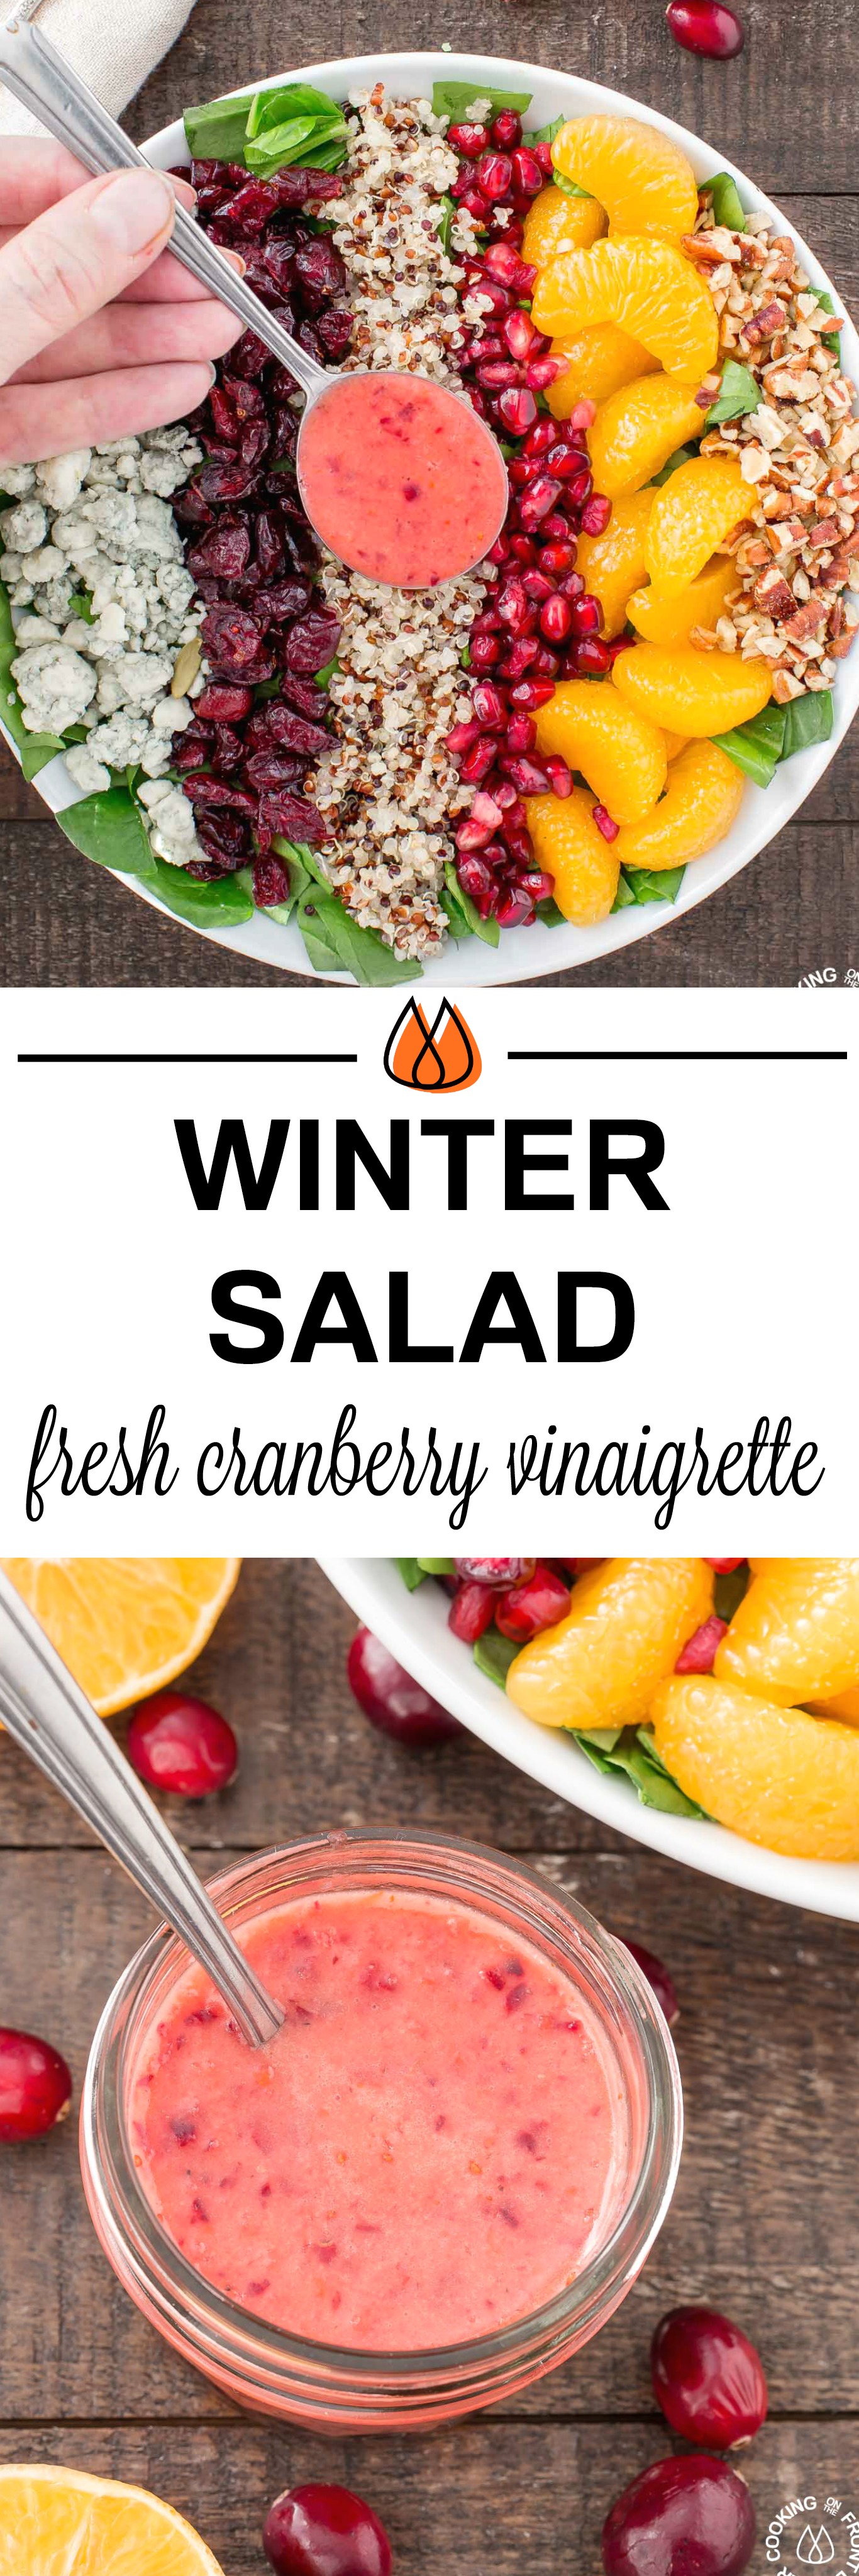 Chopped Spinach Winter Salad with a fresh cranberry orange vinaigrette #cranberry #wintersalad #healthy